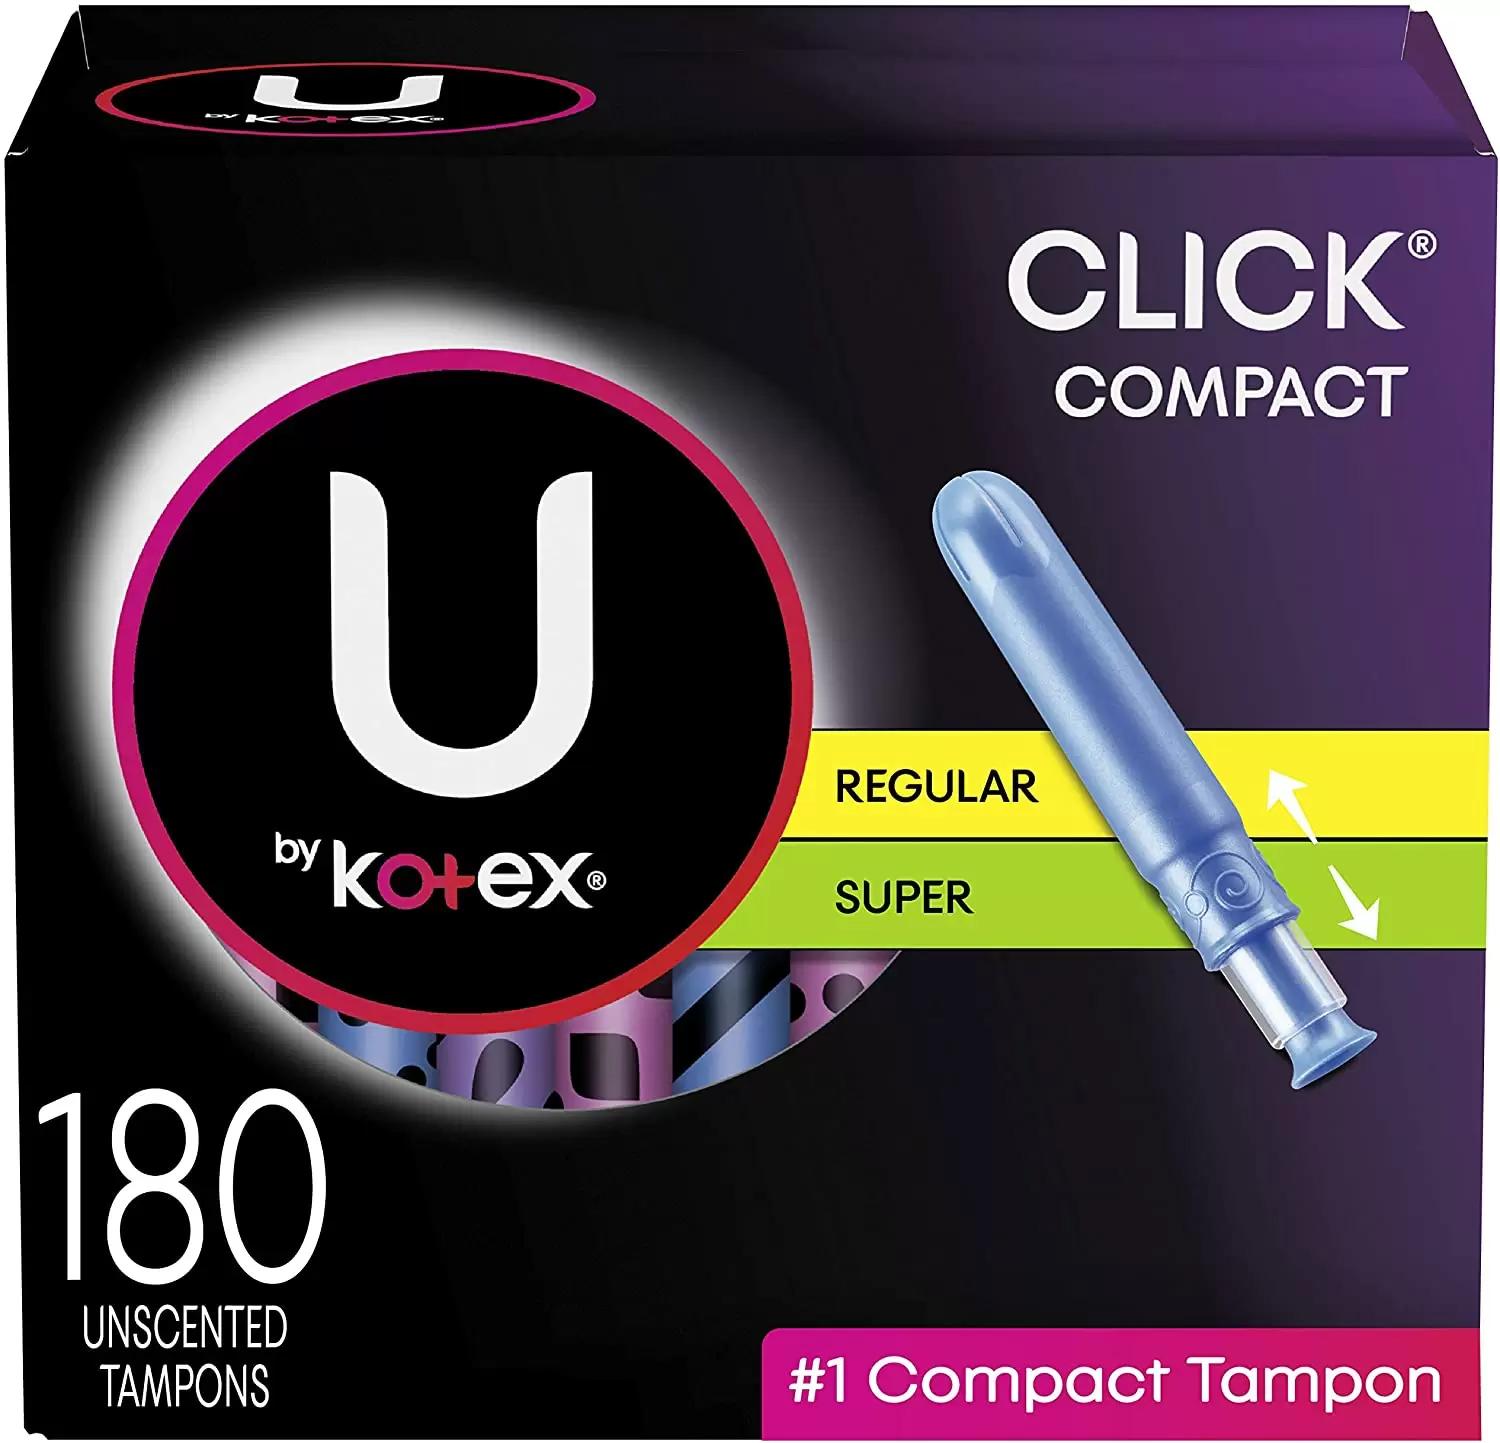 180 U by Kotex Click Compact Tampons for $23 Shipped